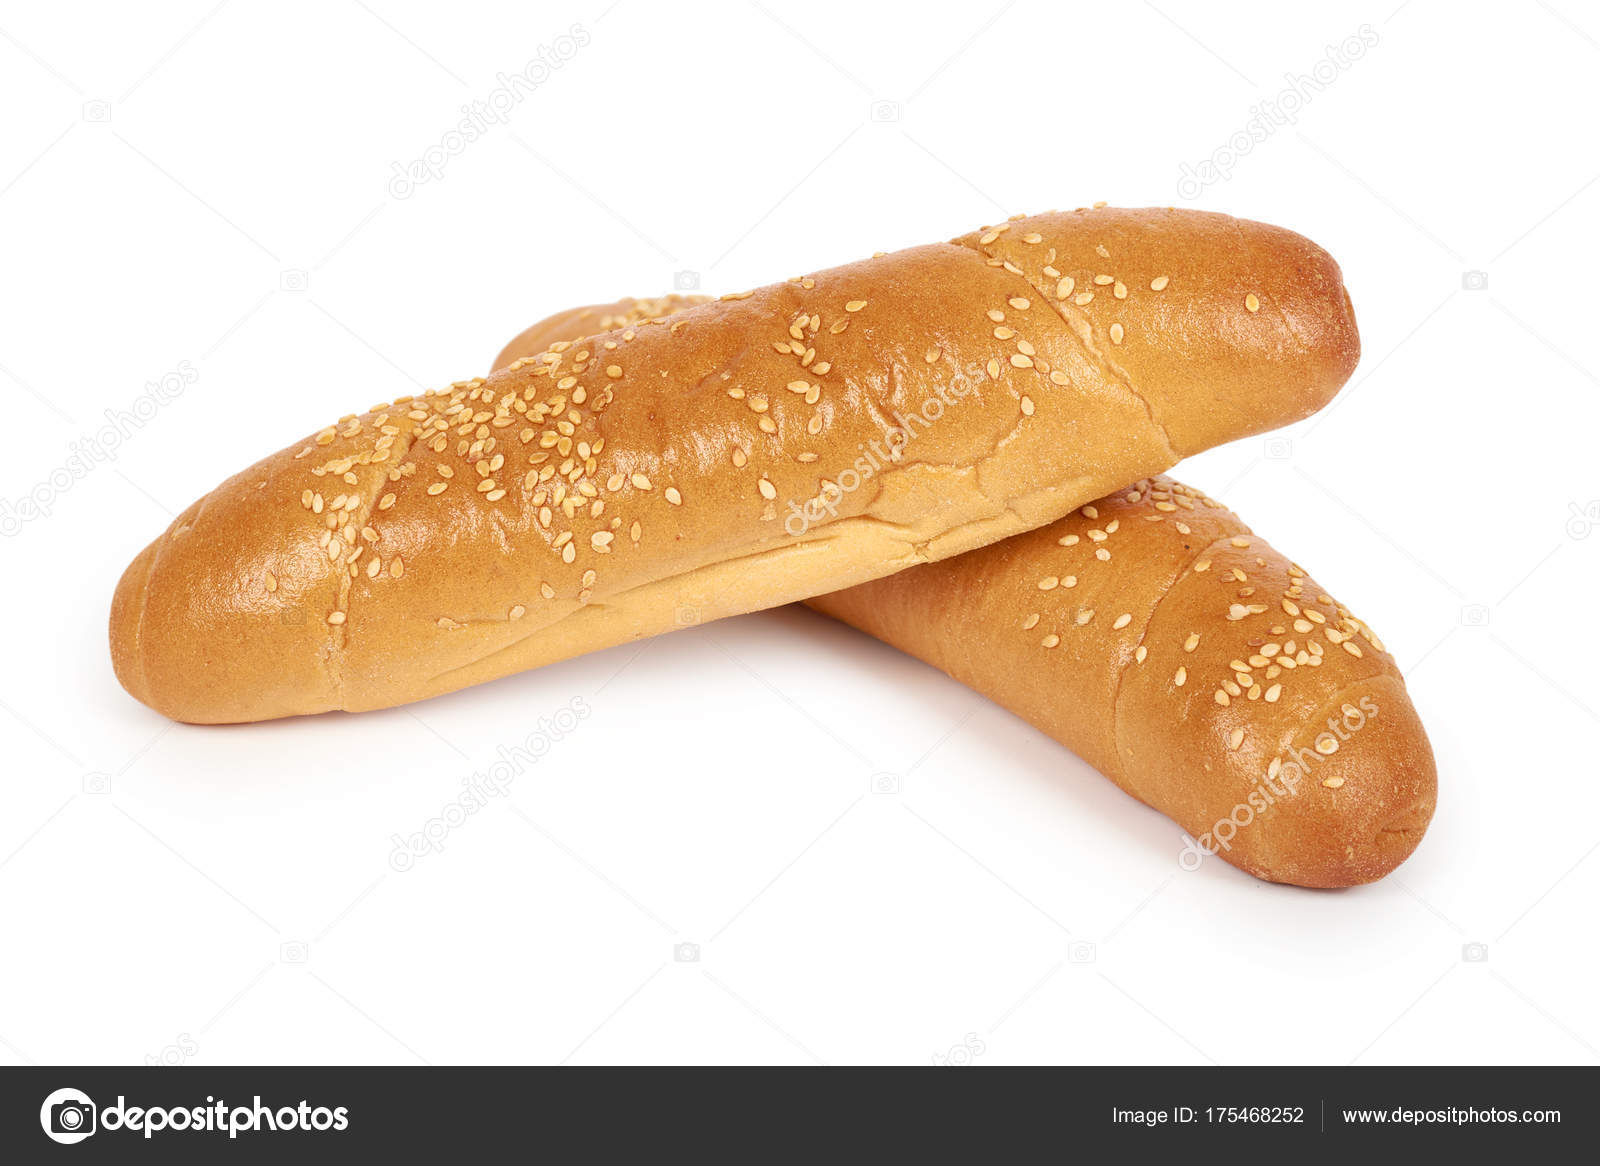 Light and delicious baguette bread isolated on white background